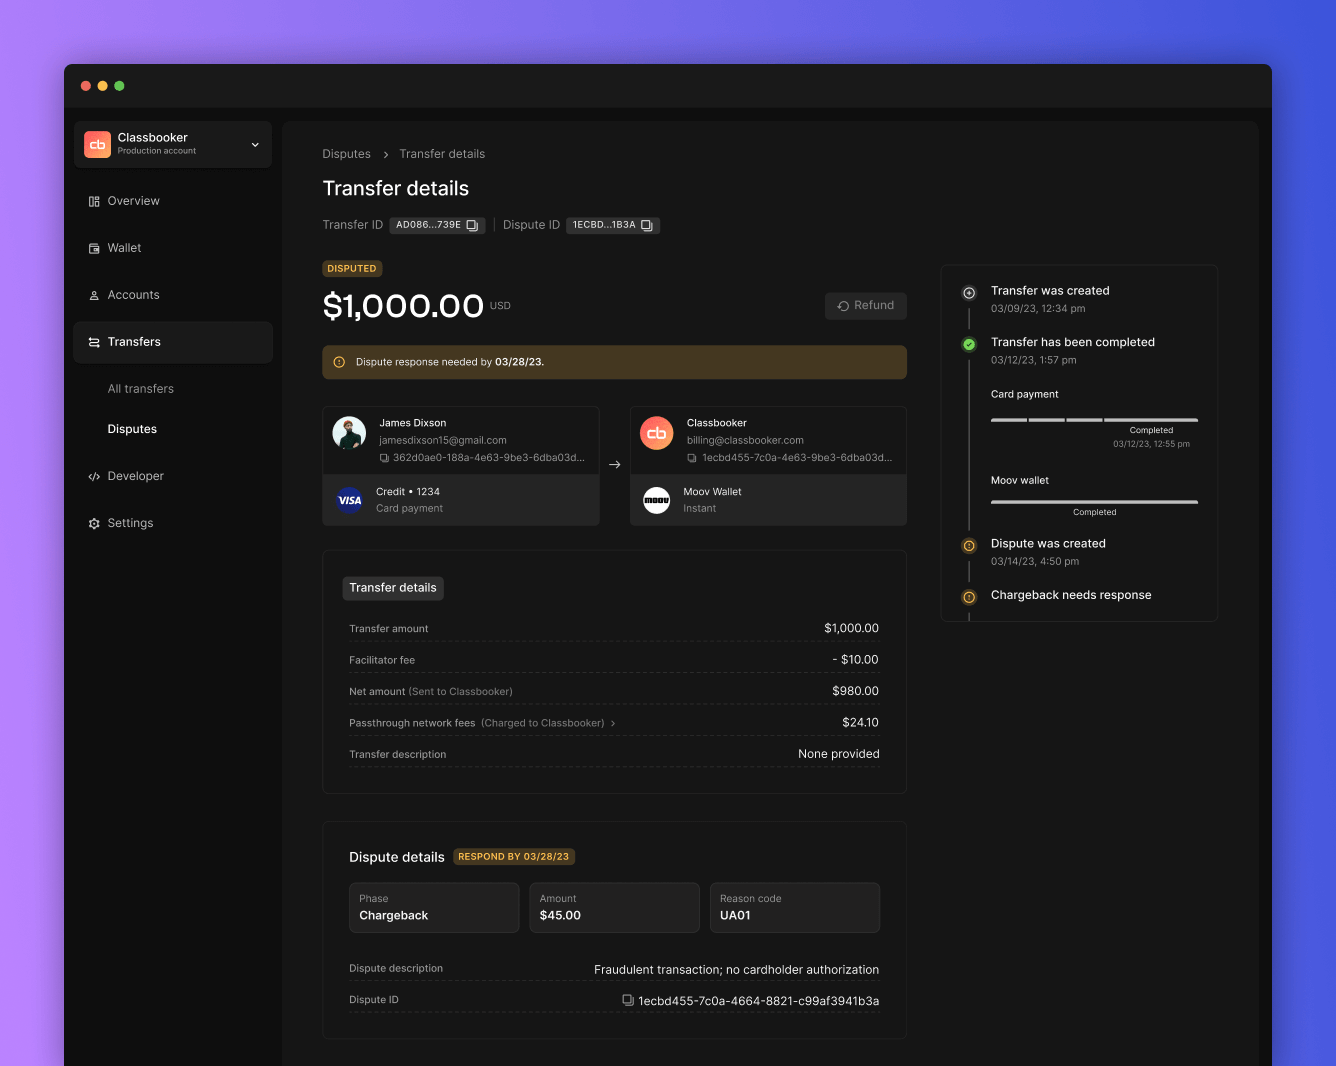 Dispute details in the Dashboard